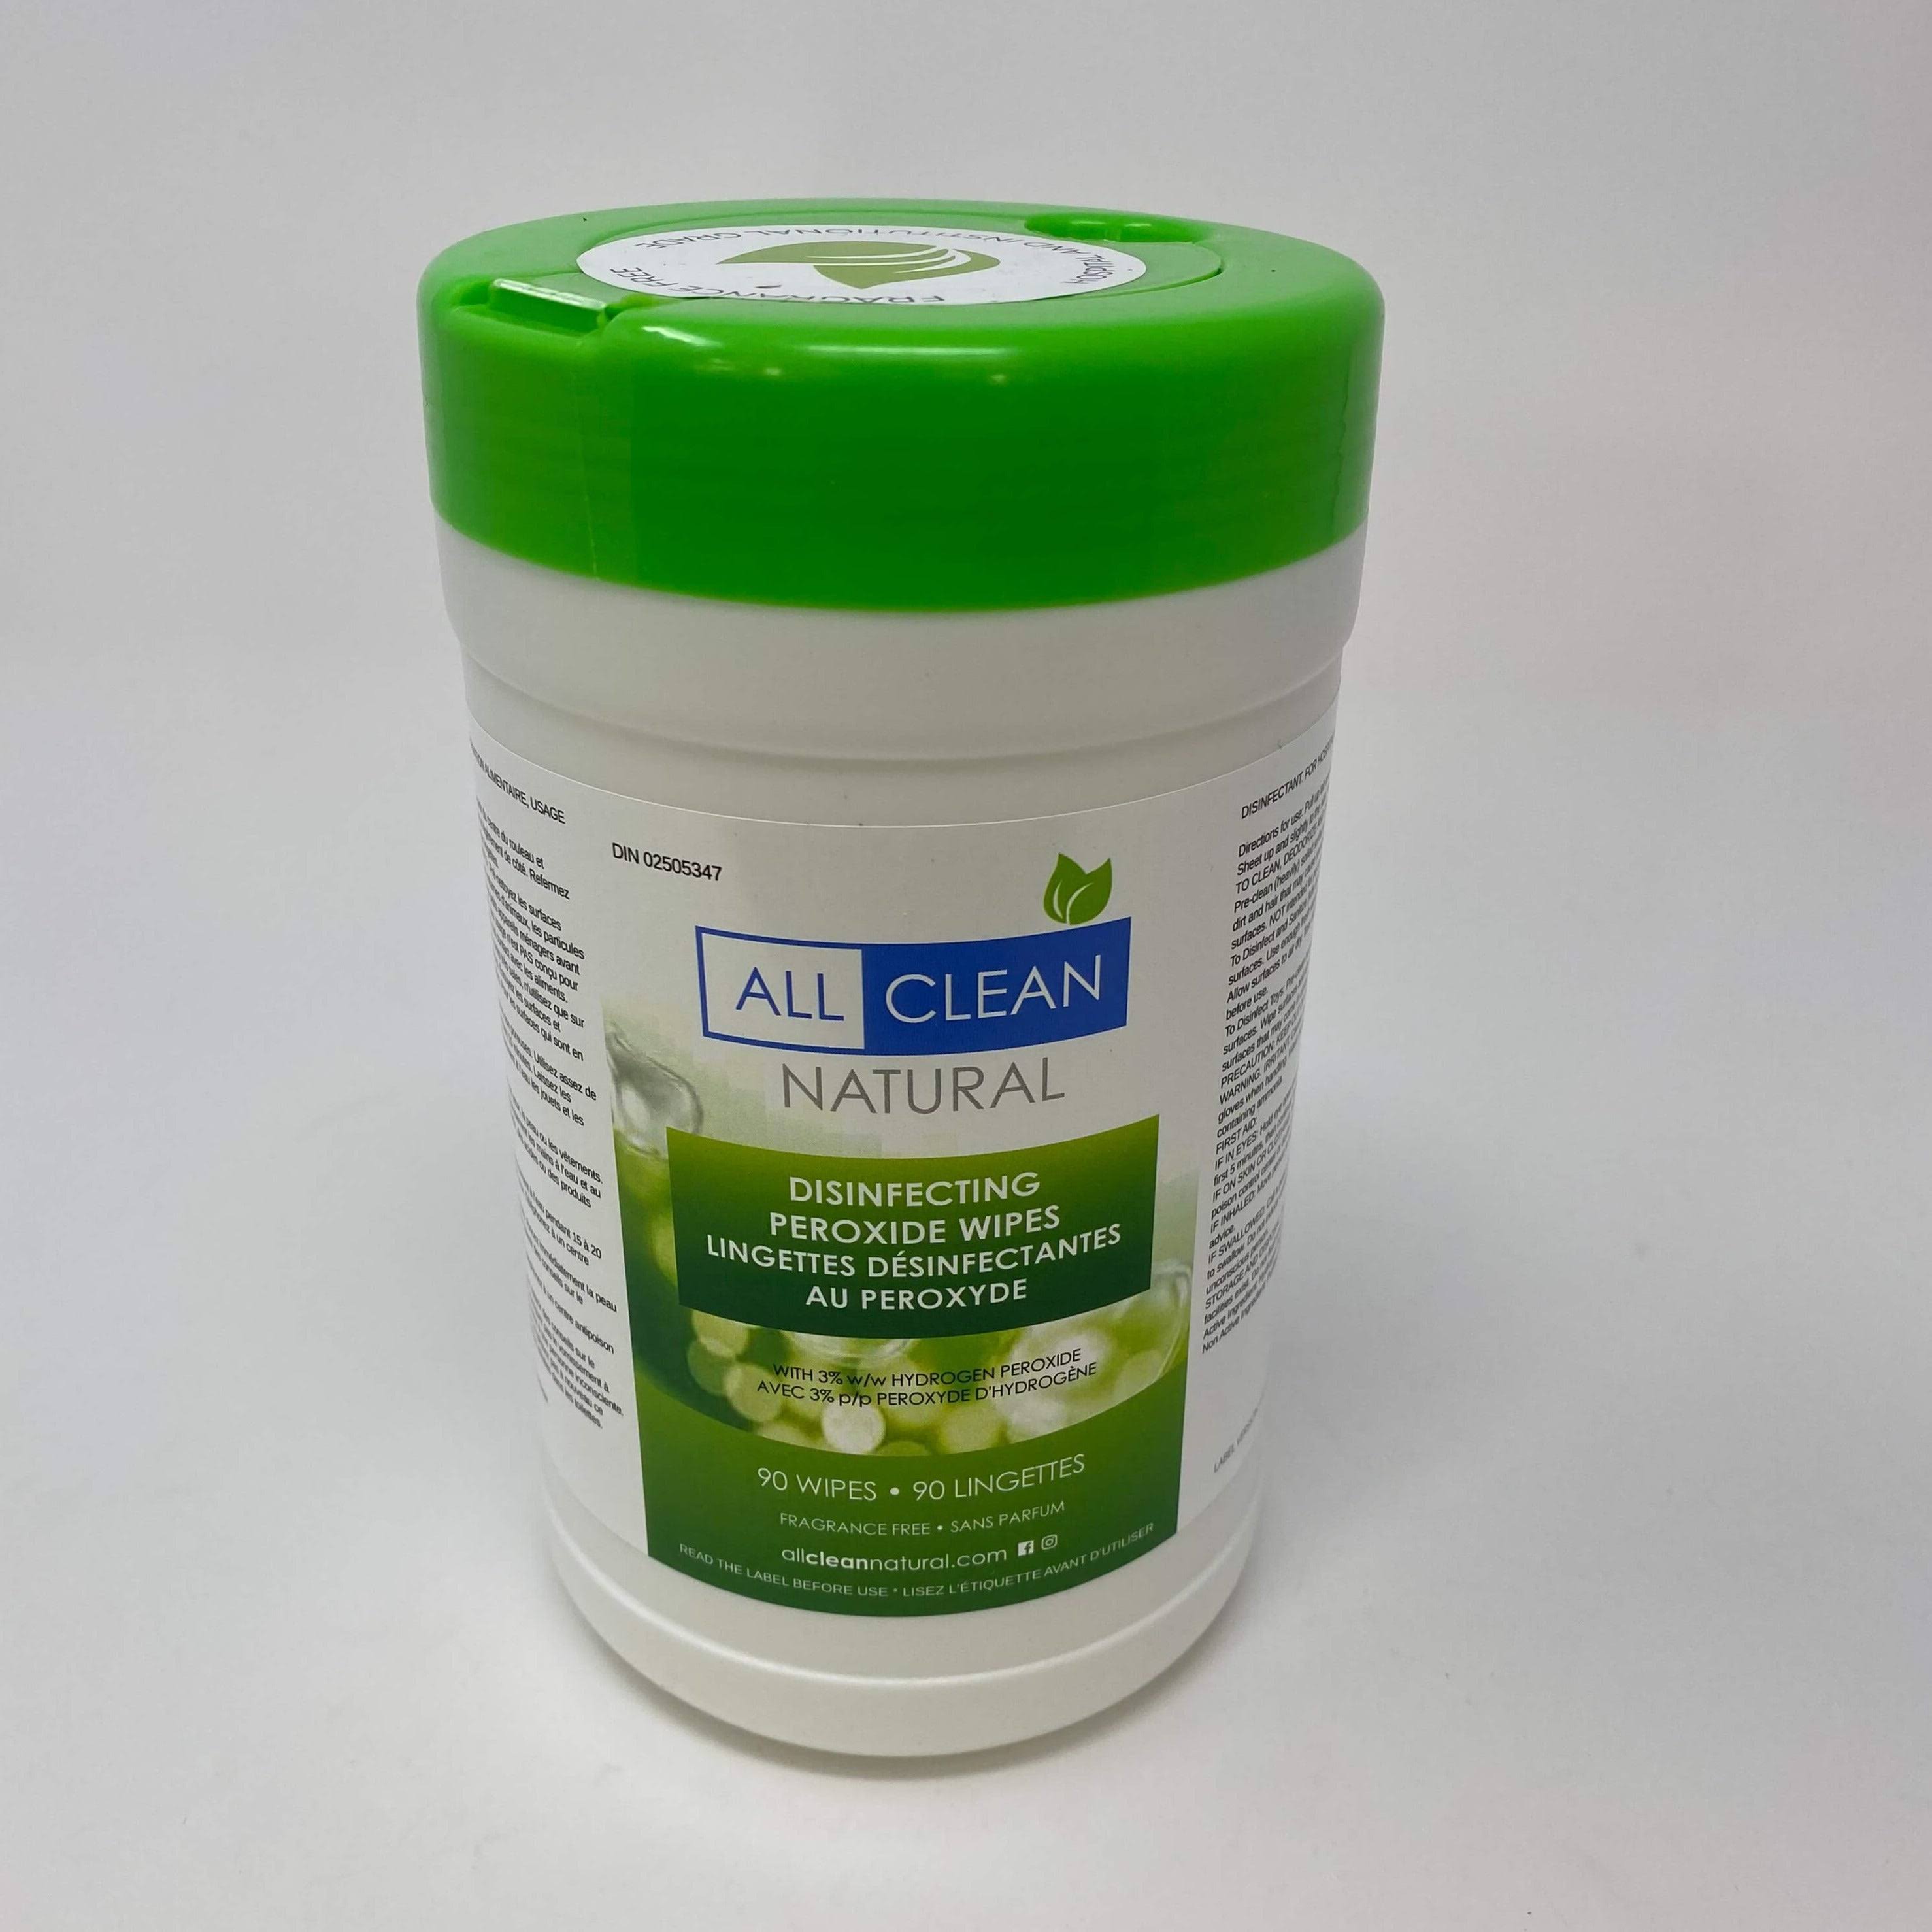 All Clean Natural Sanitizing Wipes - 90 ct